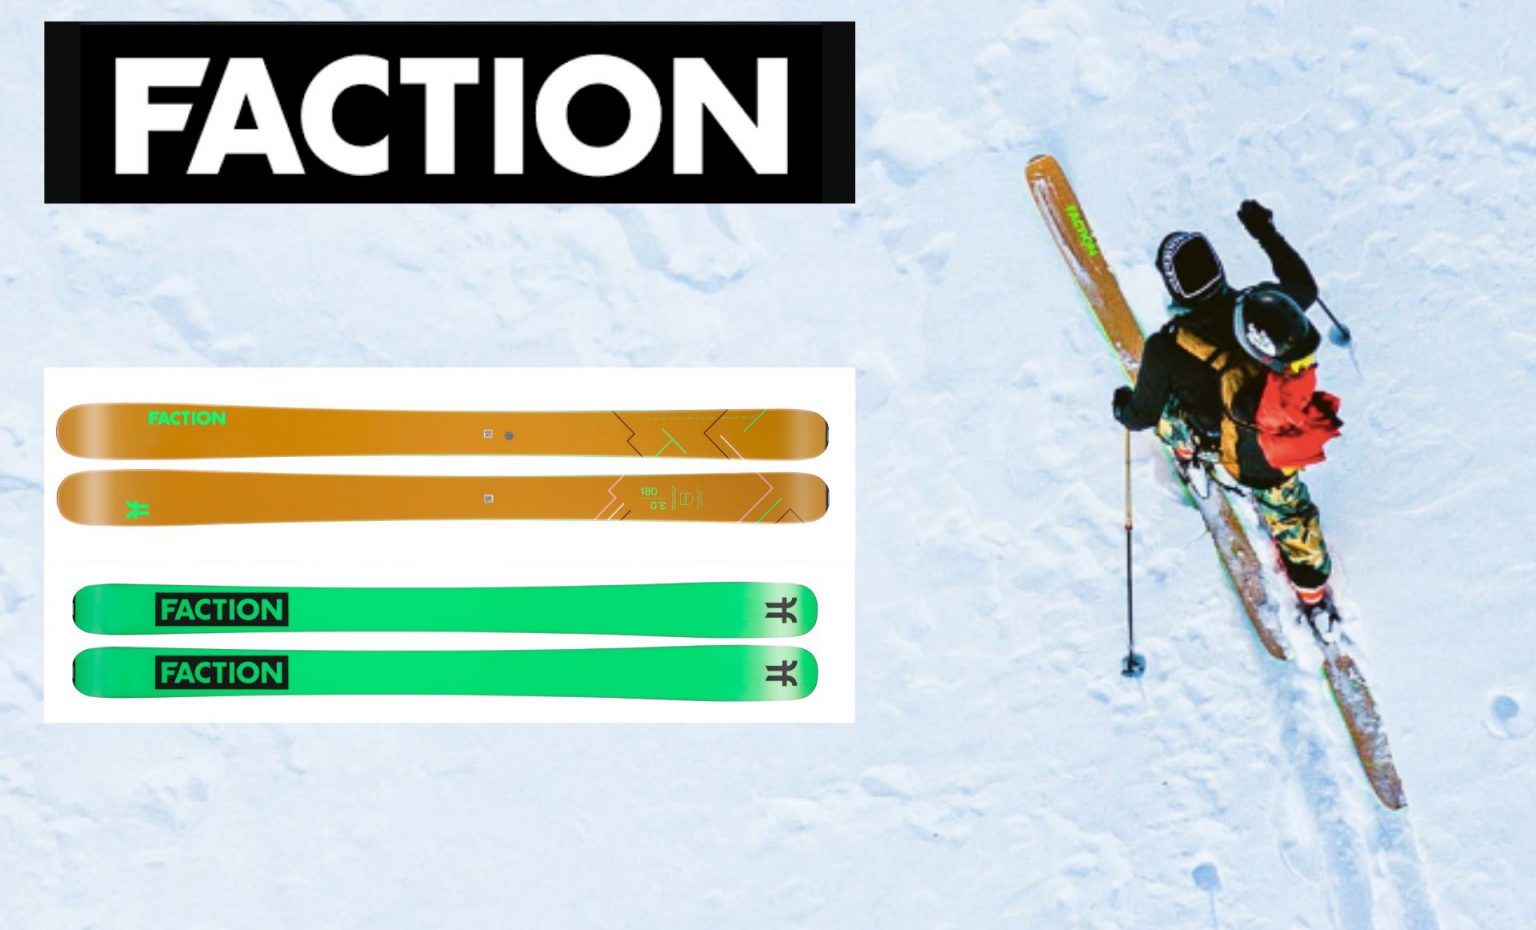 WIN FACTION'S LIMITED RELEASE AGENT 3.0 TOURING SKIS WORTH £649